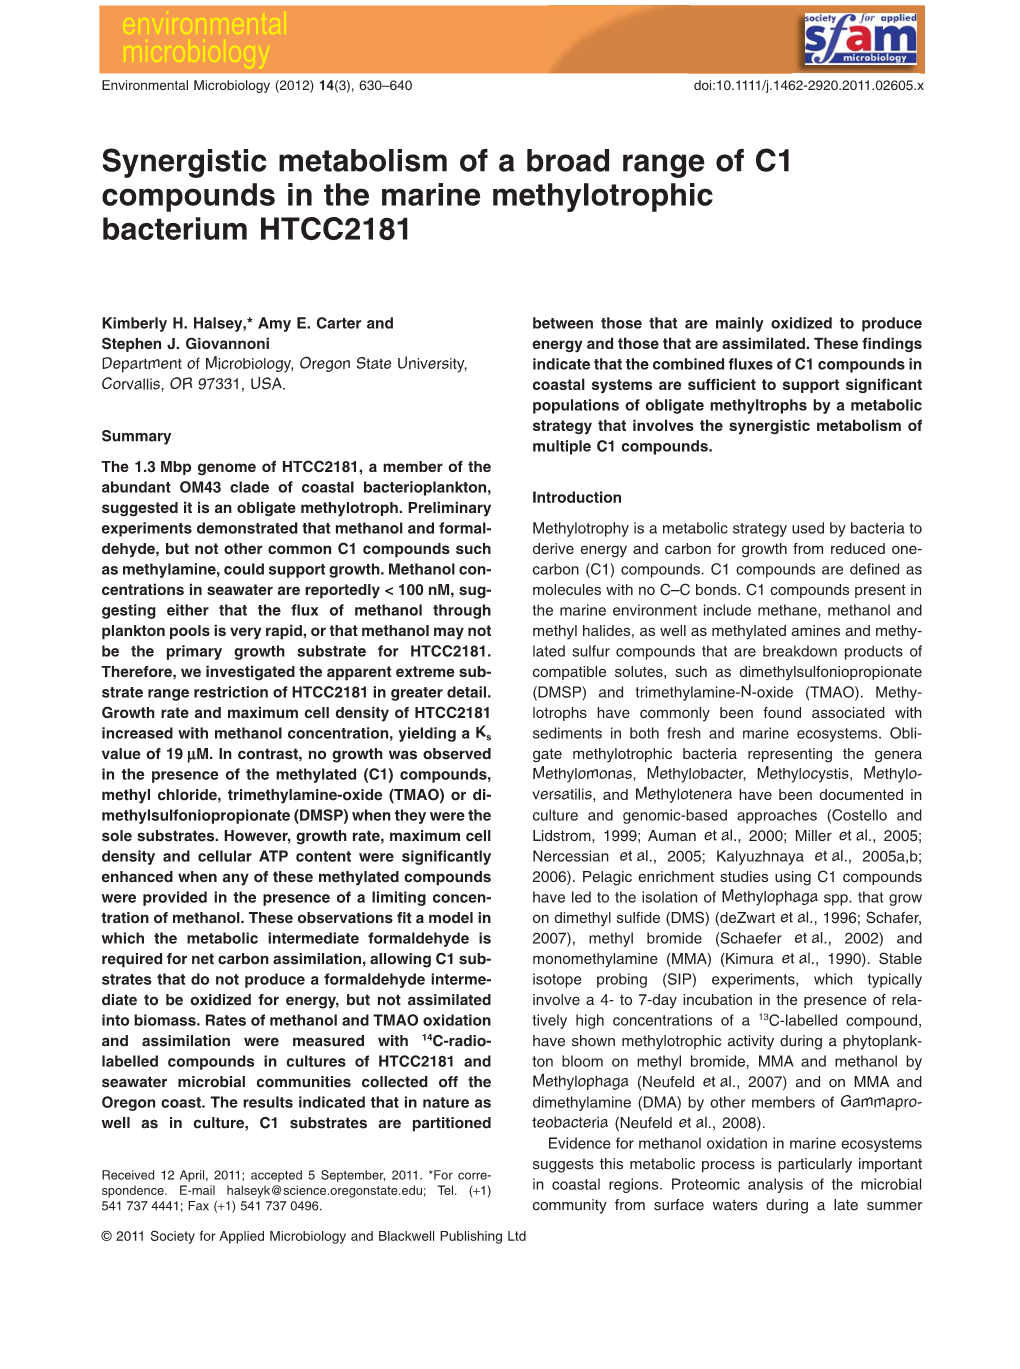 Synergistic Metabolism of a Broad Range of C1 Compounds in the Marine Methylotrophic